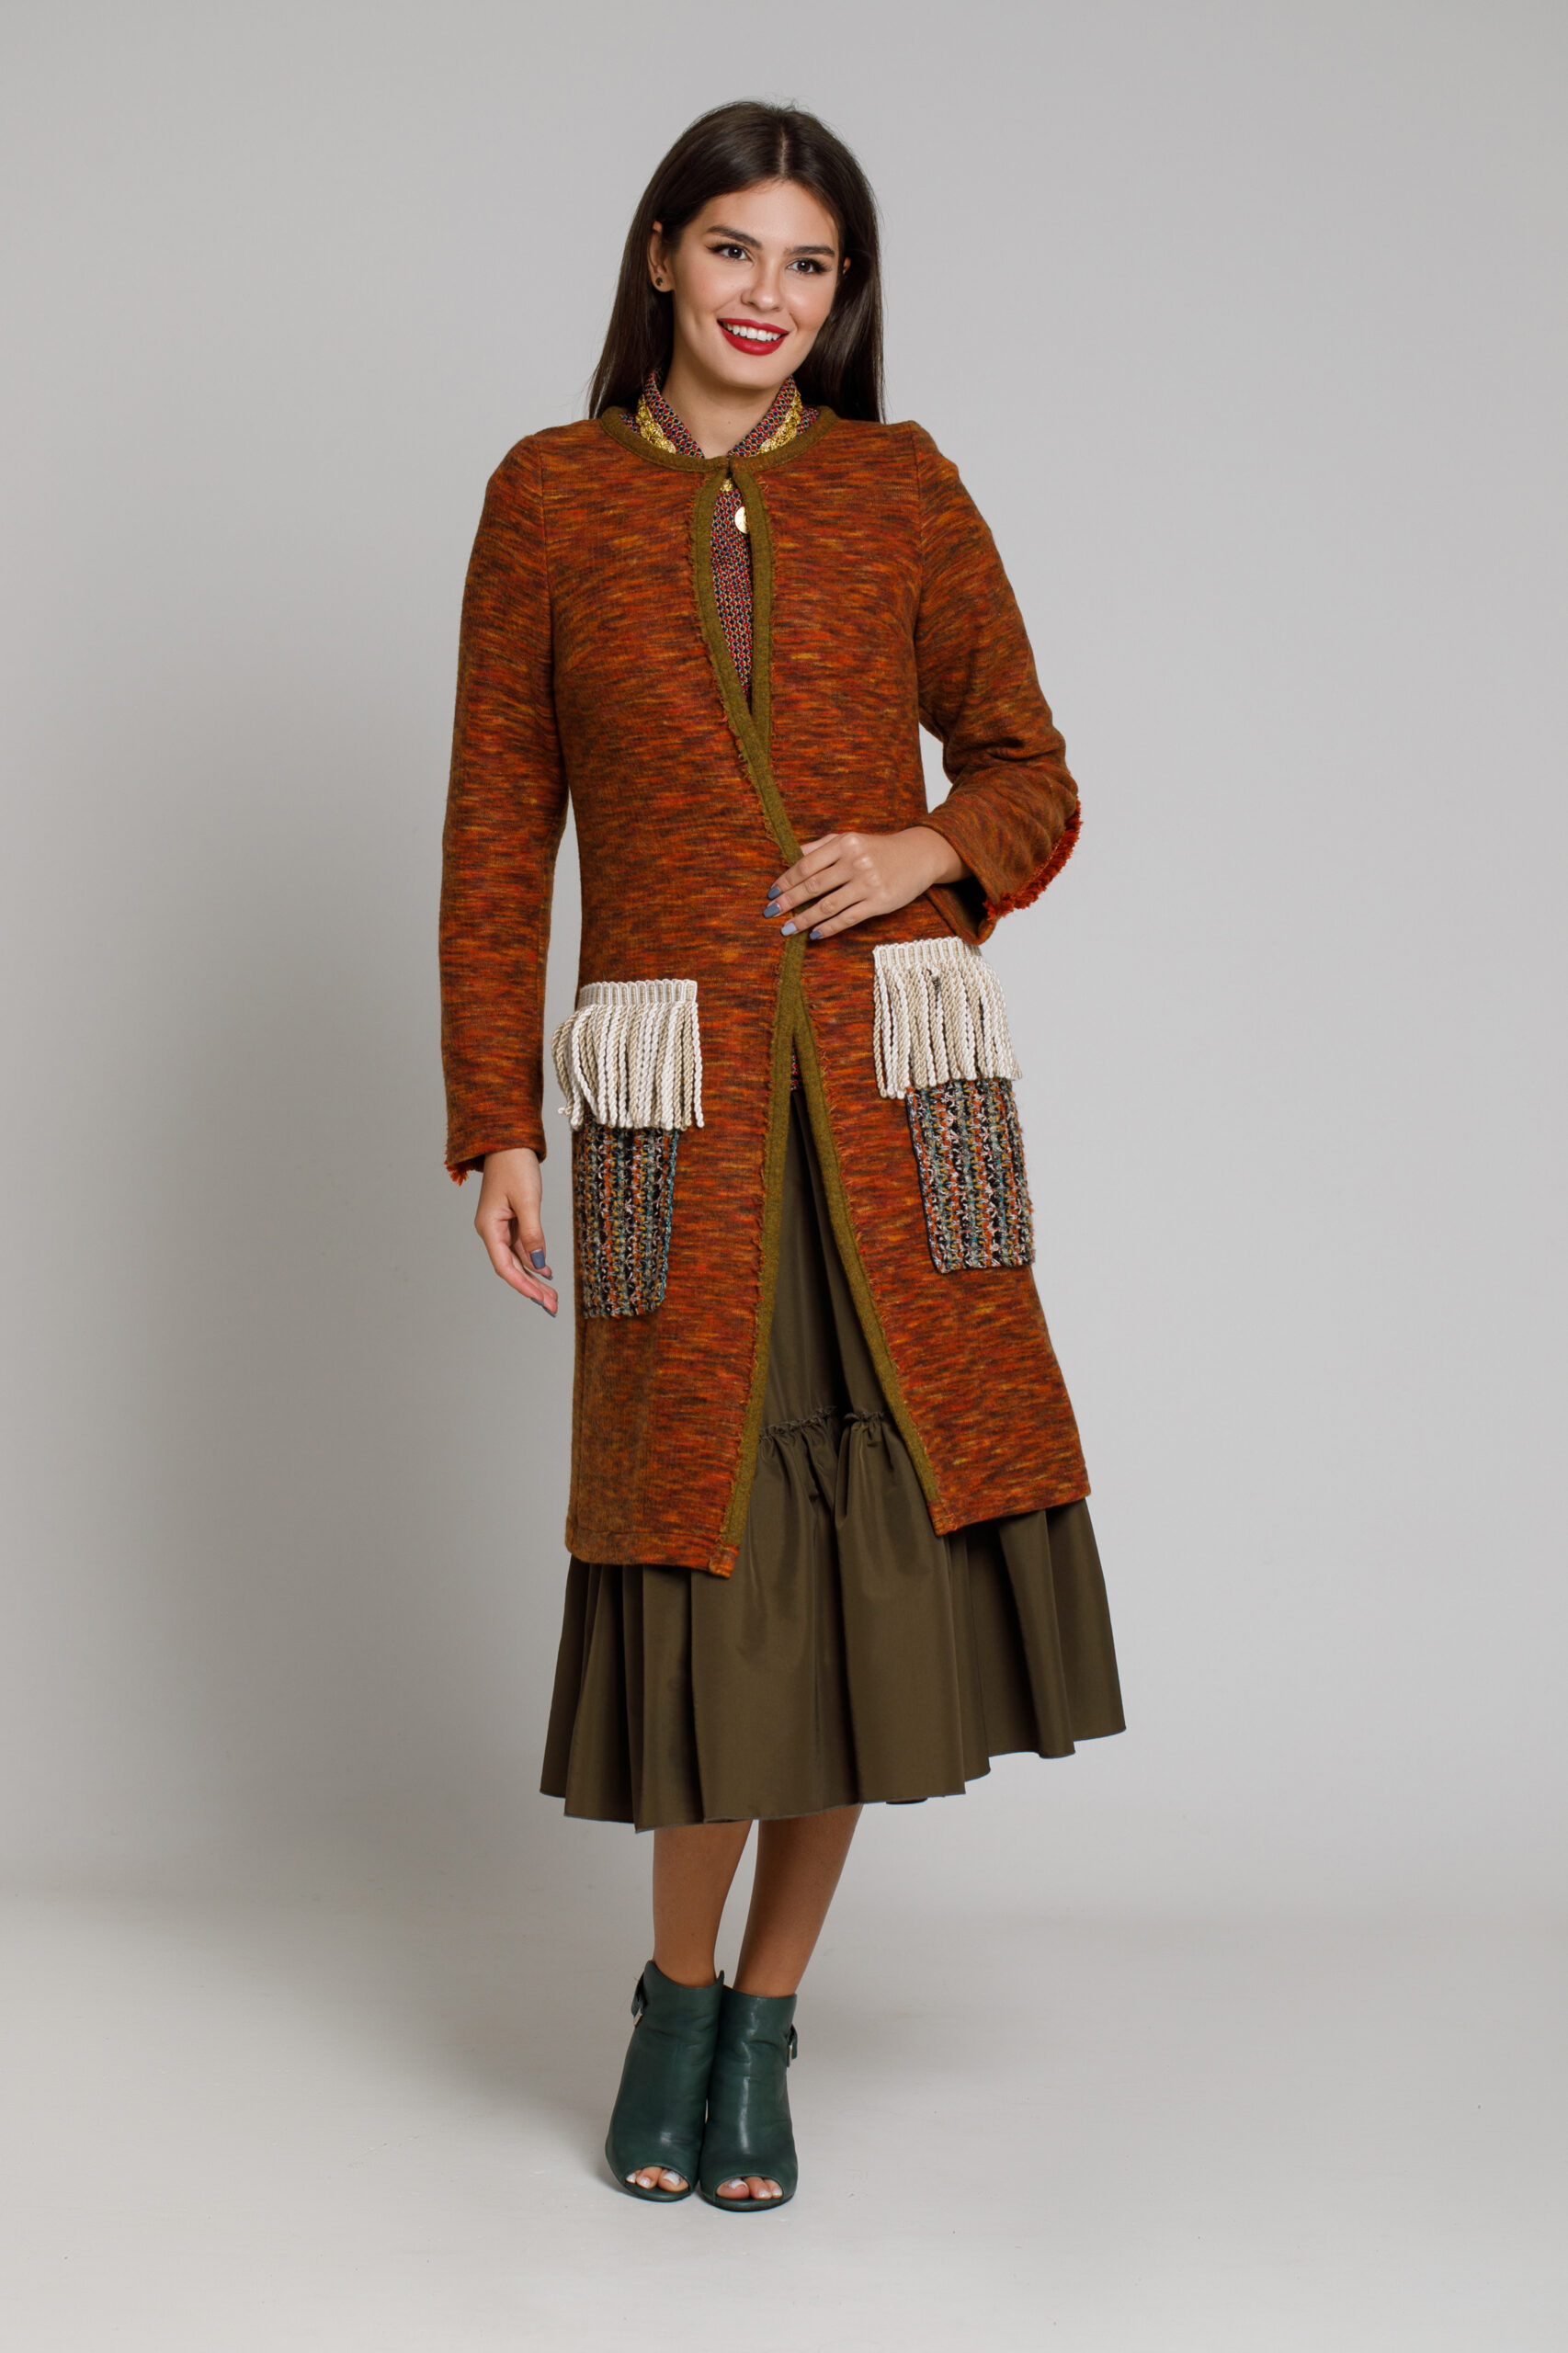 KAREN cardigan in copper knit with pockets and fringes. Natural fabrics, original design, handmade embroidery